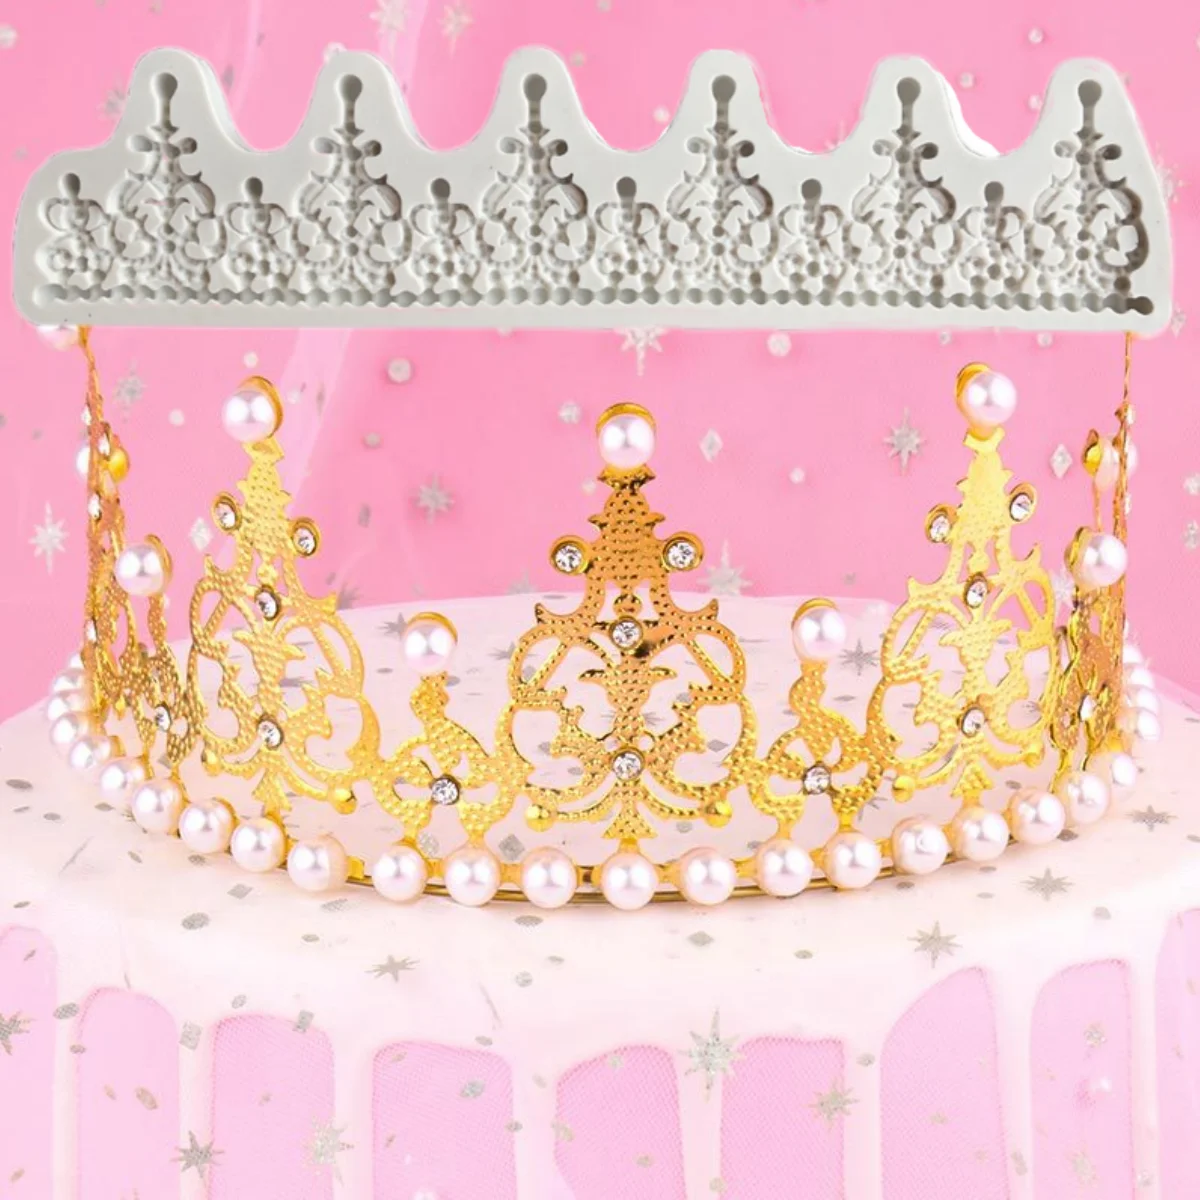 

3D England Style Large Queen Crown Silicone Mold DIY Fondant Chocolate Cake Embossed Fudge Decor Baking Tool Plaster Resin Mould